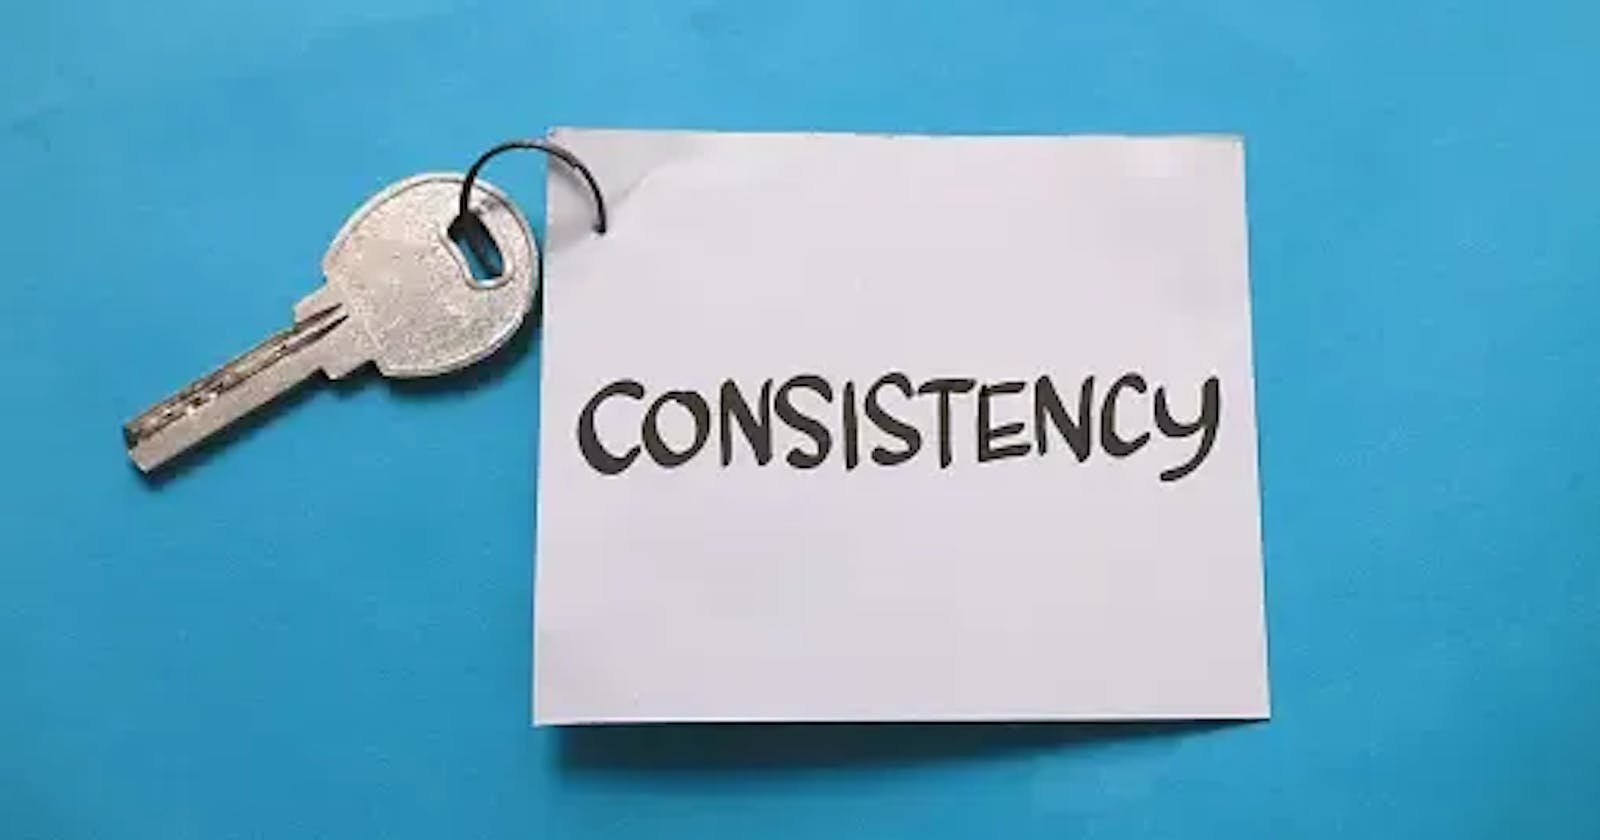 How is Consistency?